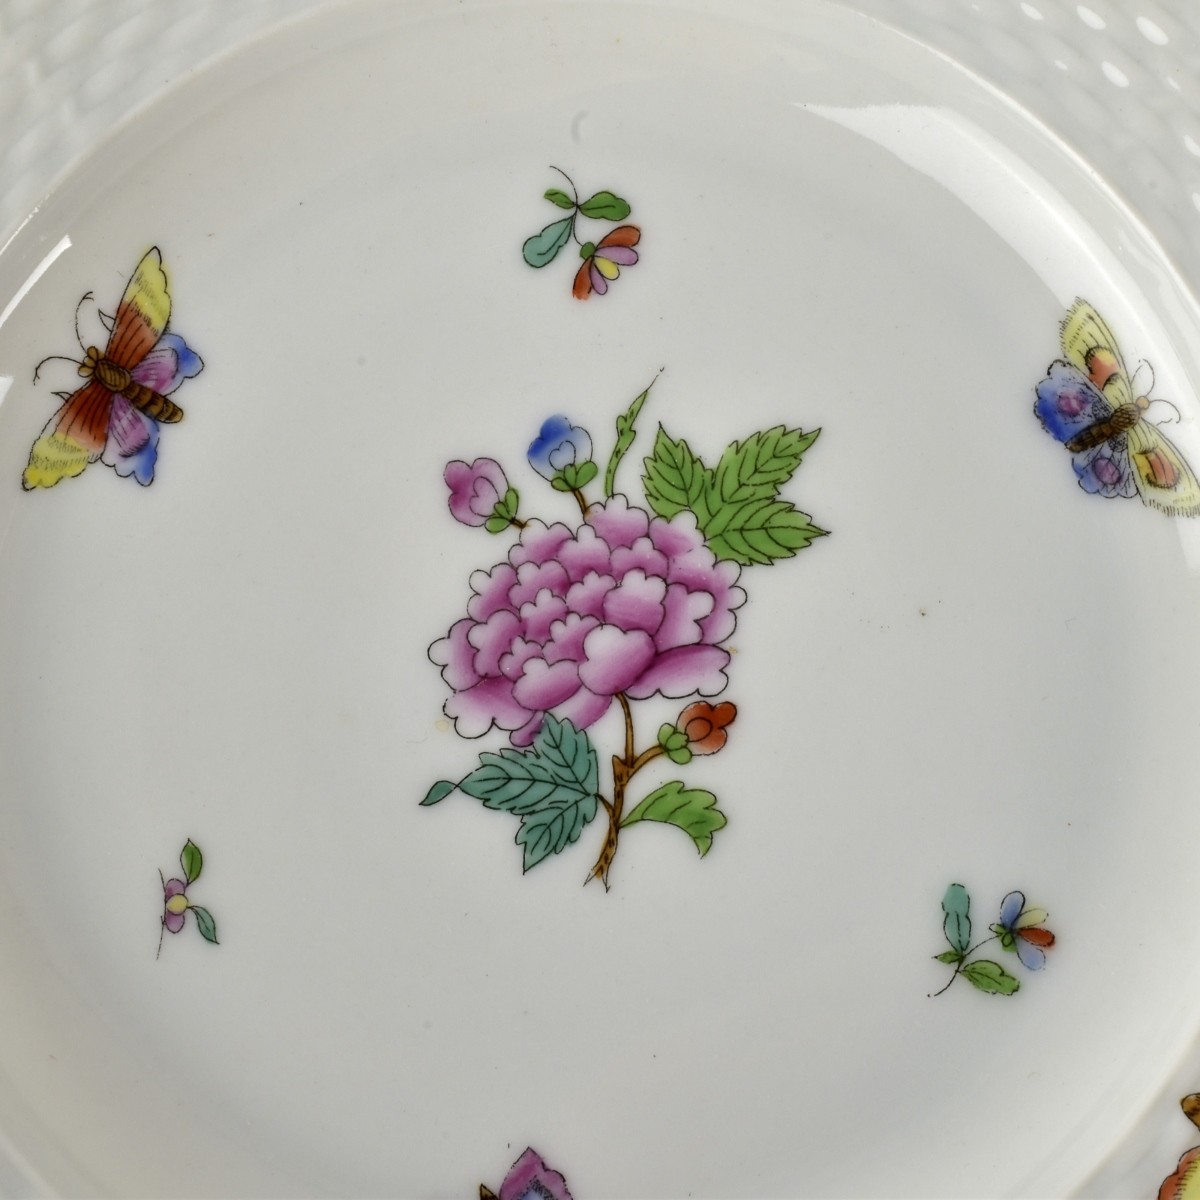 Five (5) Herend China Plates